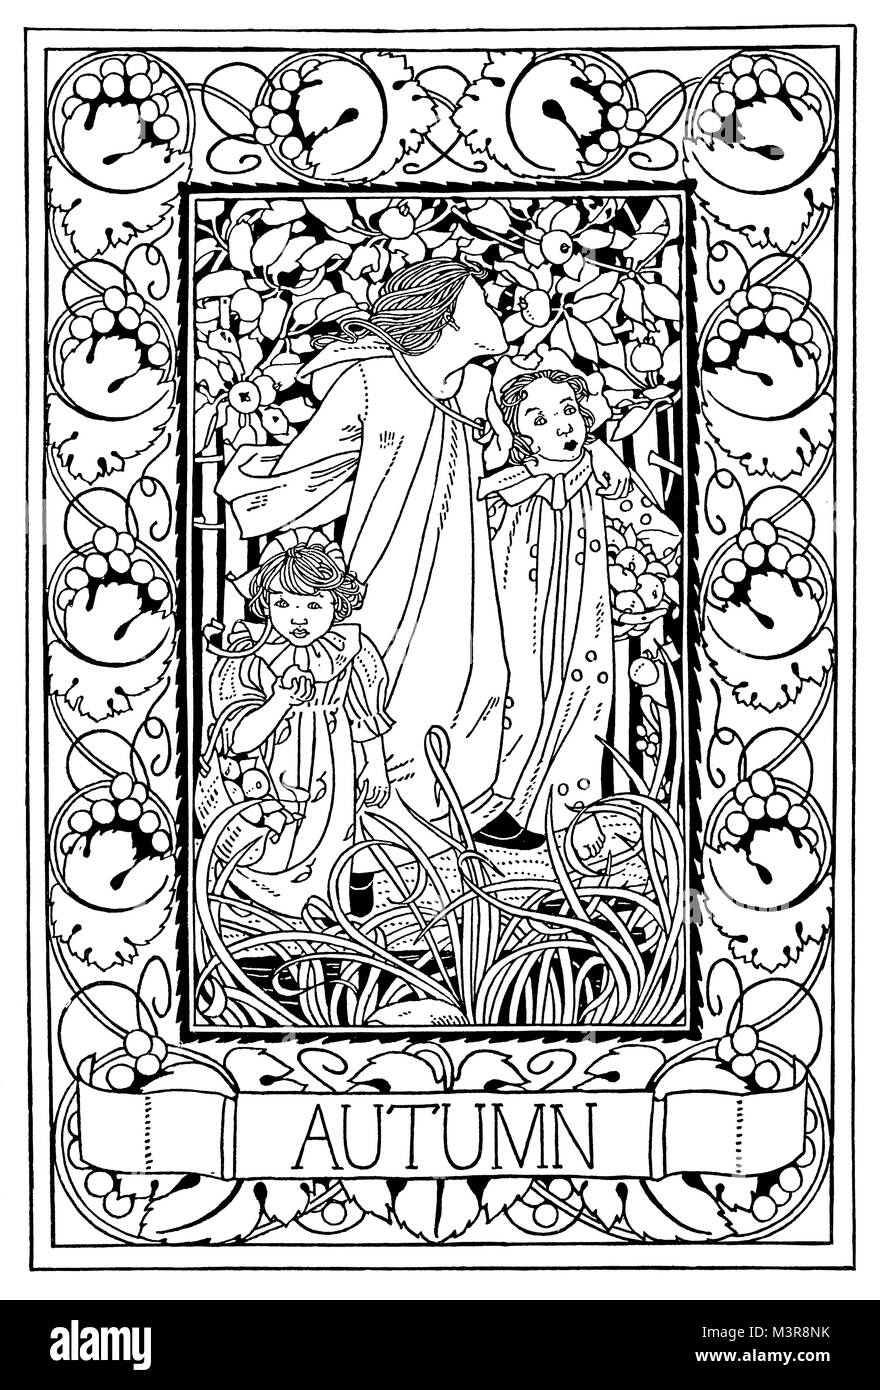 Autumn, line illustration depicting children in apple orchard by female artist Evelyn Holden of Birmingham from 1895 The Studio an Illustrated Magazin Stock Photo